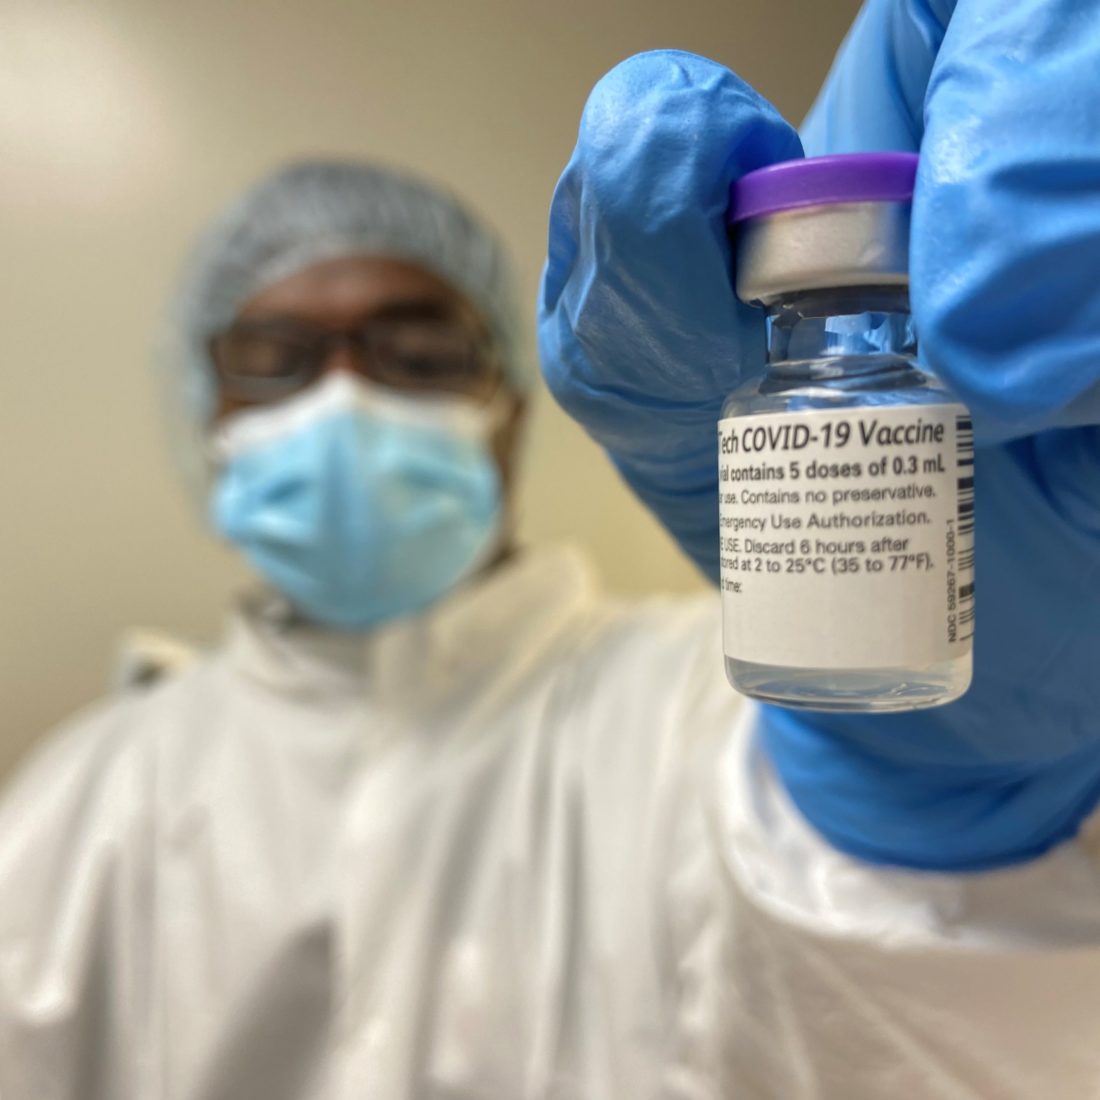 Pharmacy technician wearing personal protective equipment holding a vial of the COVID-19 vaccine